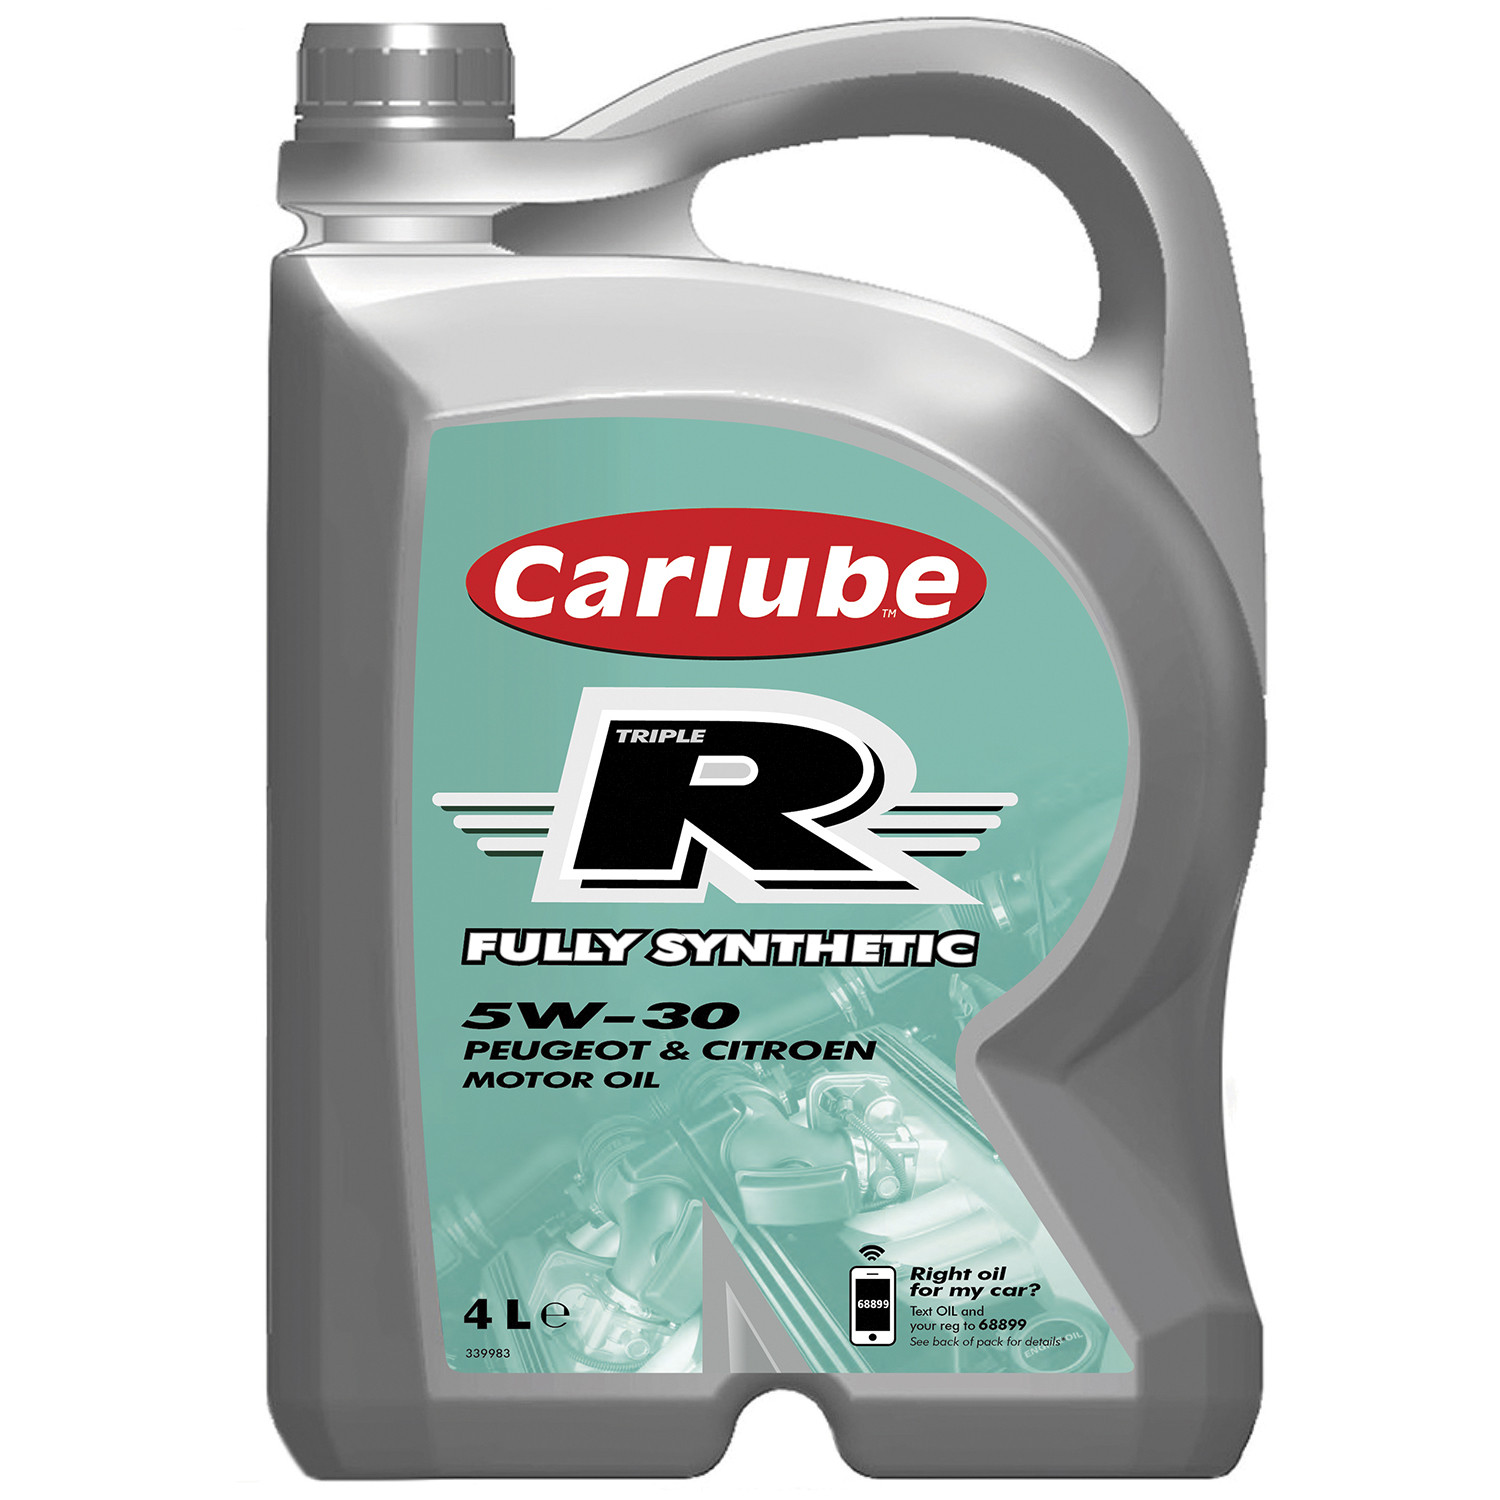 Triple R Fully Synthetic 5W30 Peugeot and Citroen Motor Oil - 4l Image